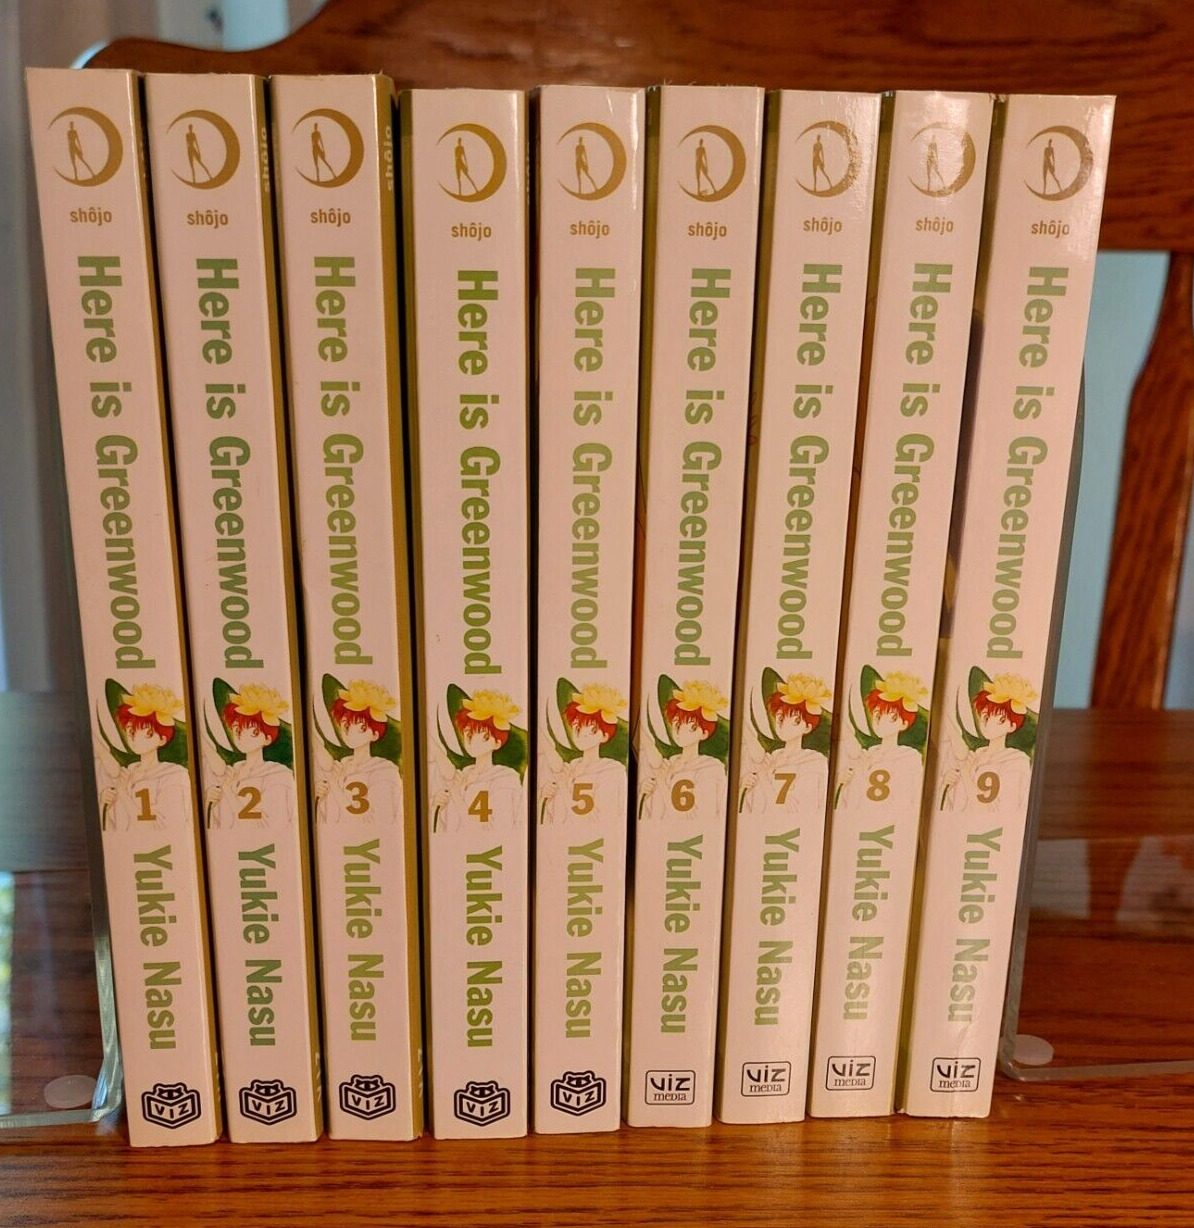 HERE IS GREENWOOD VOLS 1,2,3,4,5,6,7,8,9 COMPLETE LOT *ENGLISH*